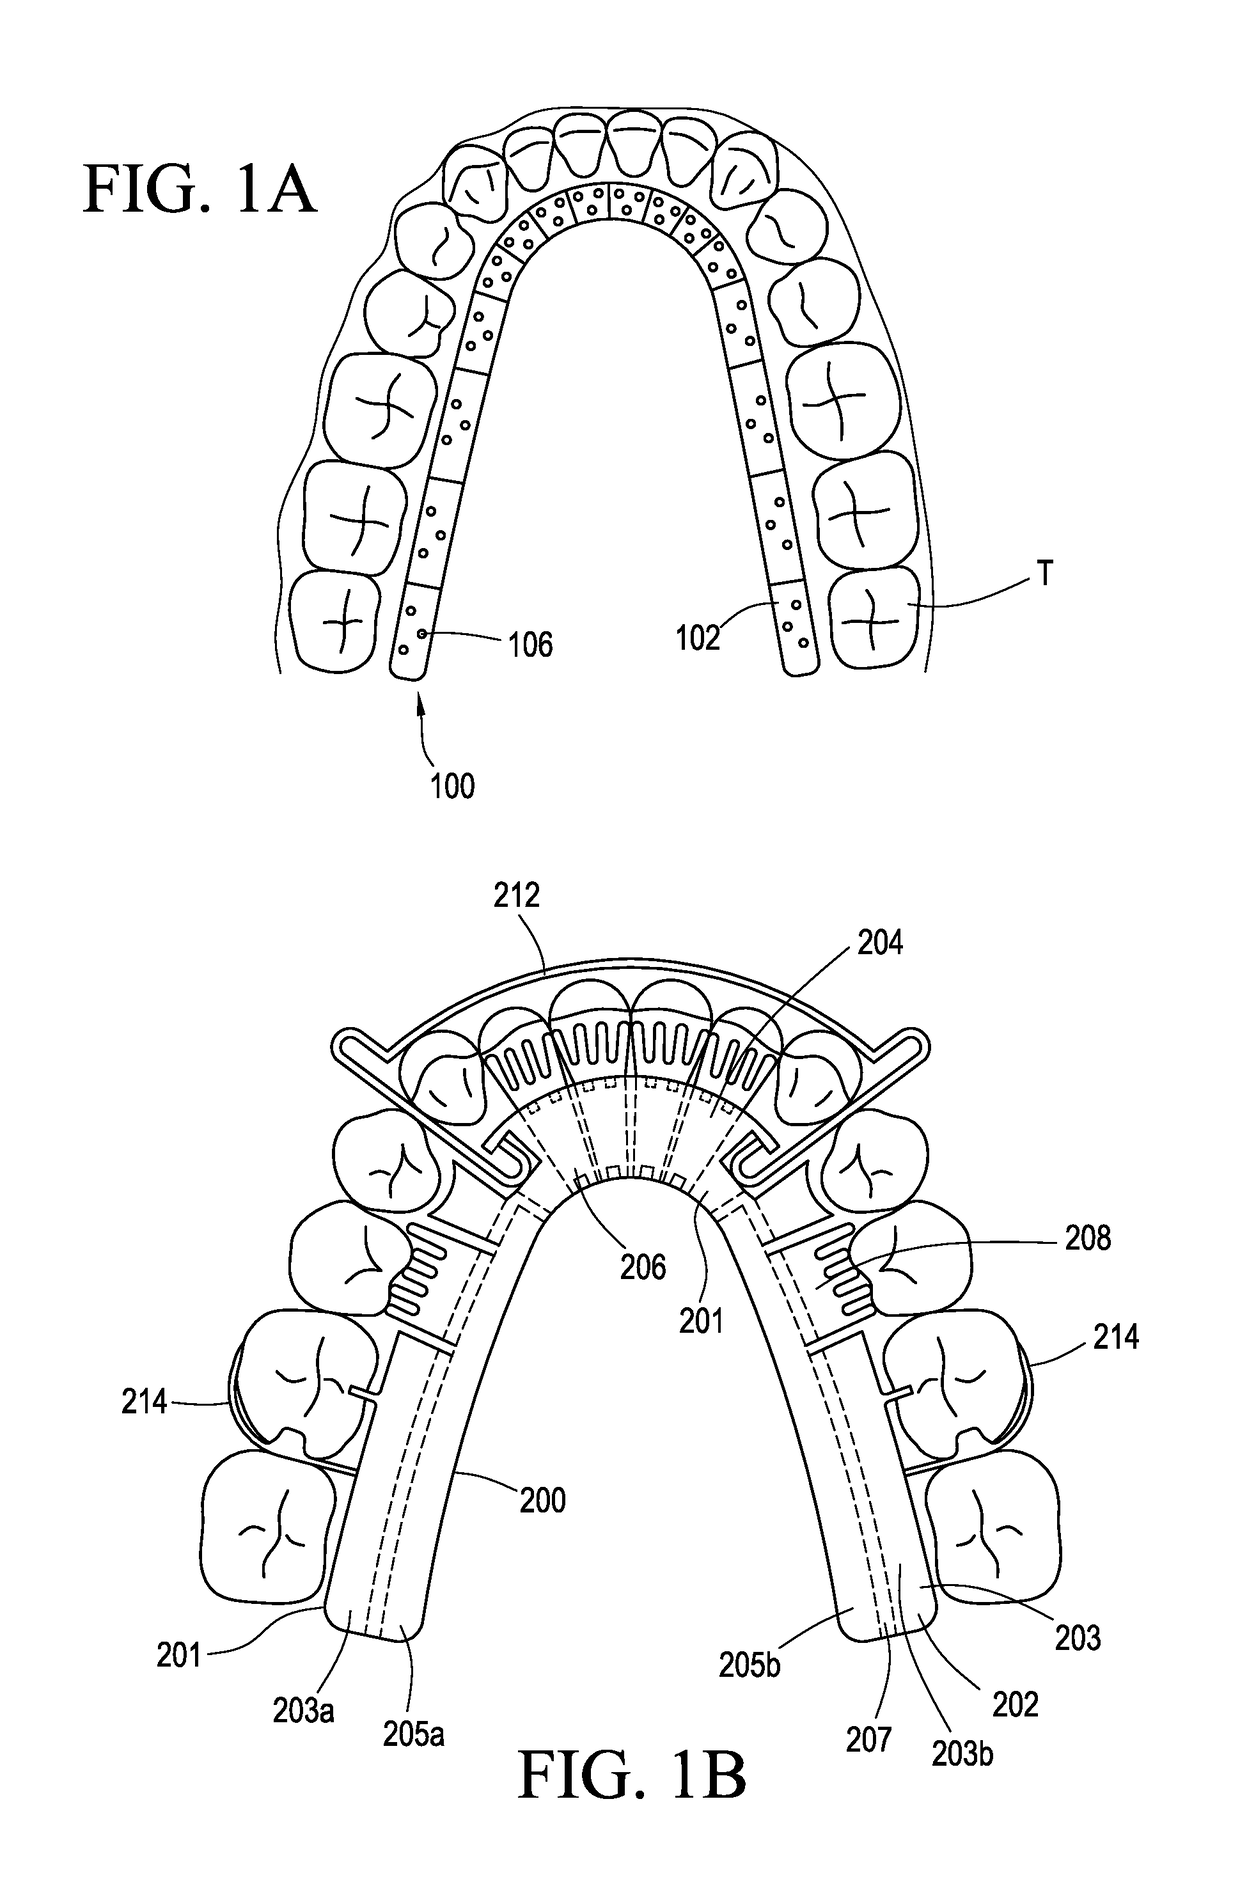 Orthodontic assembly